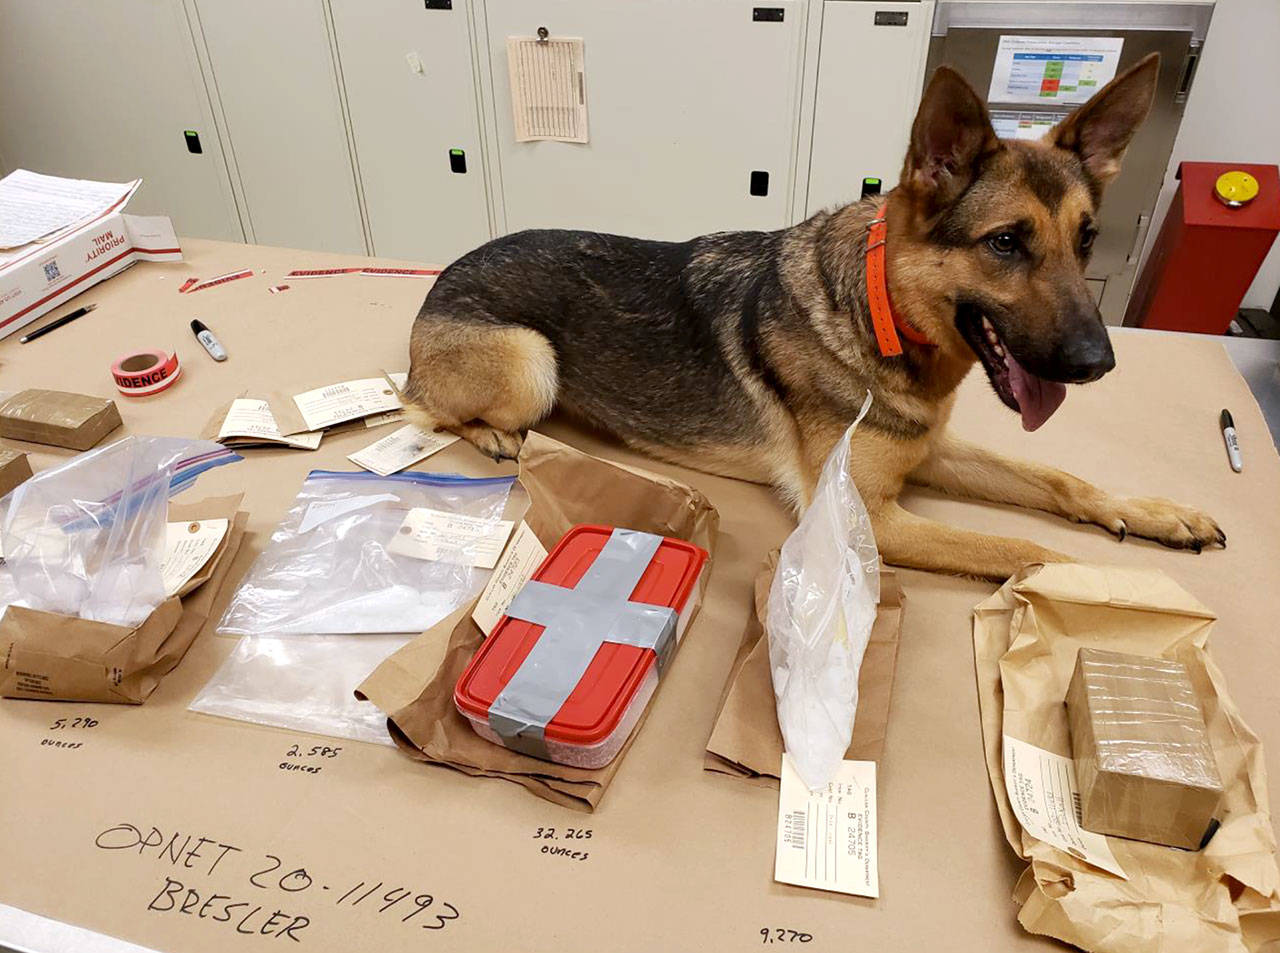 Narcotic Detection K-9 Kira from the Suquamish Police Department is pictured with drugs OPNET detectives said they seized during the arrest of a Sequim man. (OPNET photo)